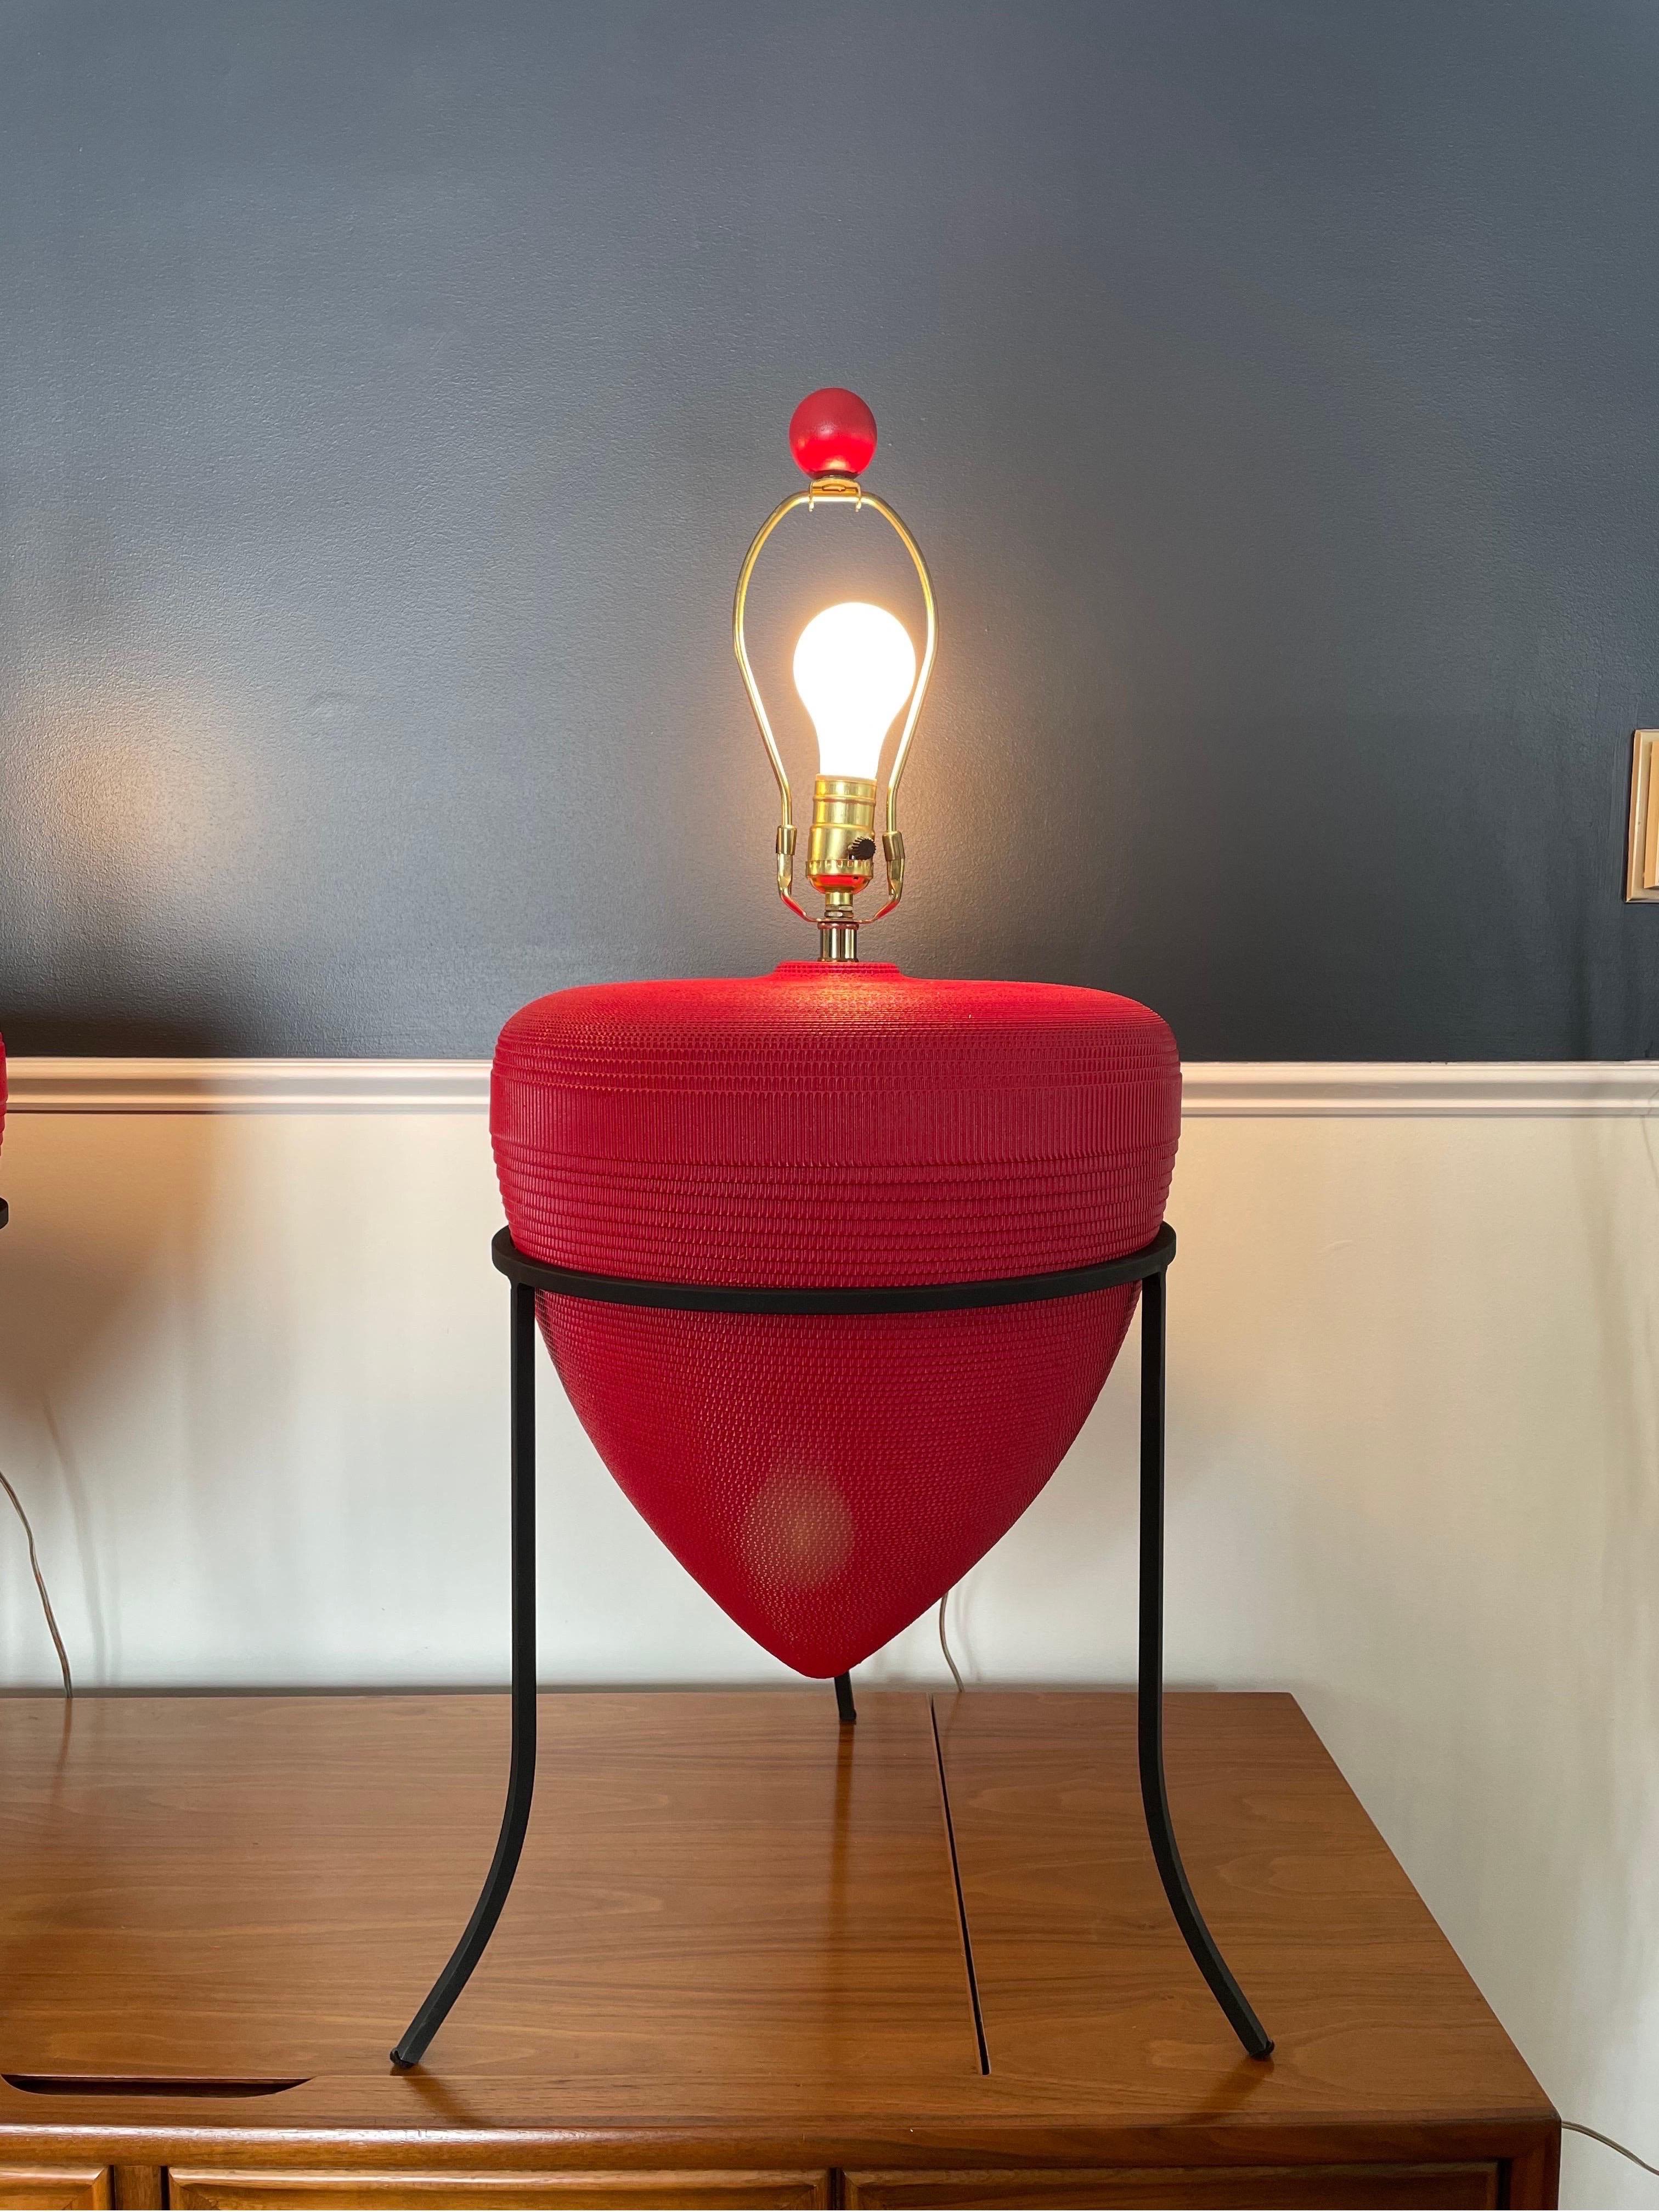 Jaw Dropping pair of urn lamps complete with original shades is from the 80’s or 90’s. Produced from wrapped corrugated cardboard, these unique urn lamps sit in a wrought iron tripod stand. POP of color in amazing red! In the style of Frank Gehry